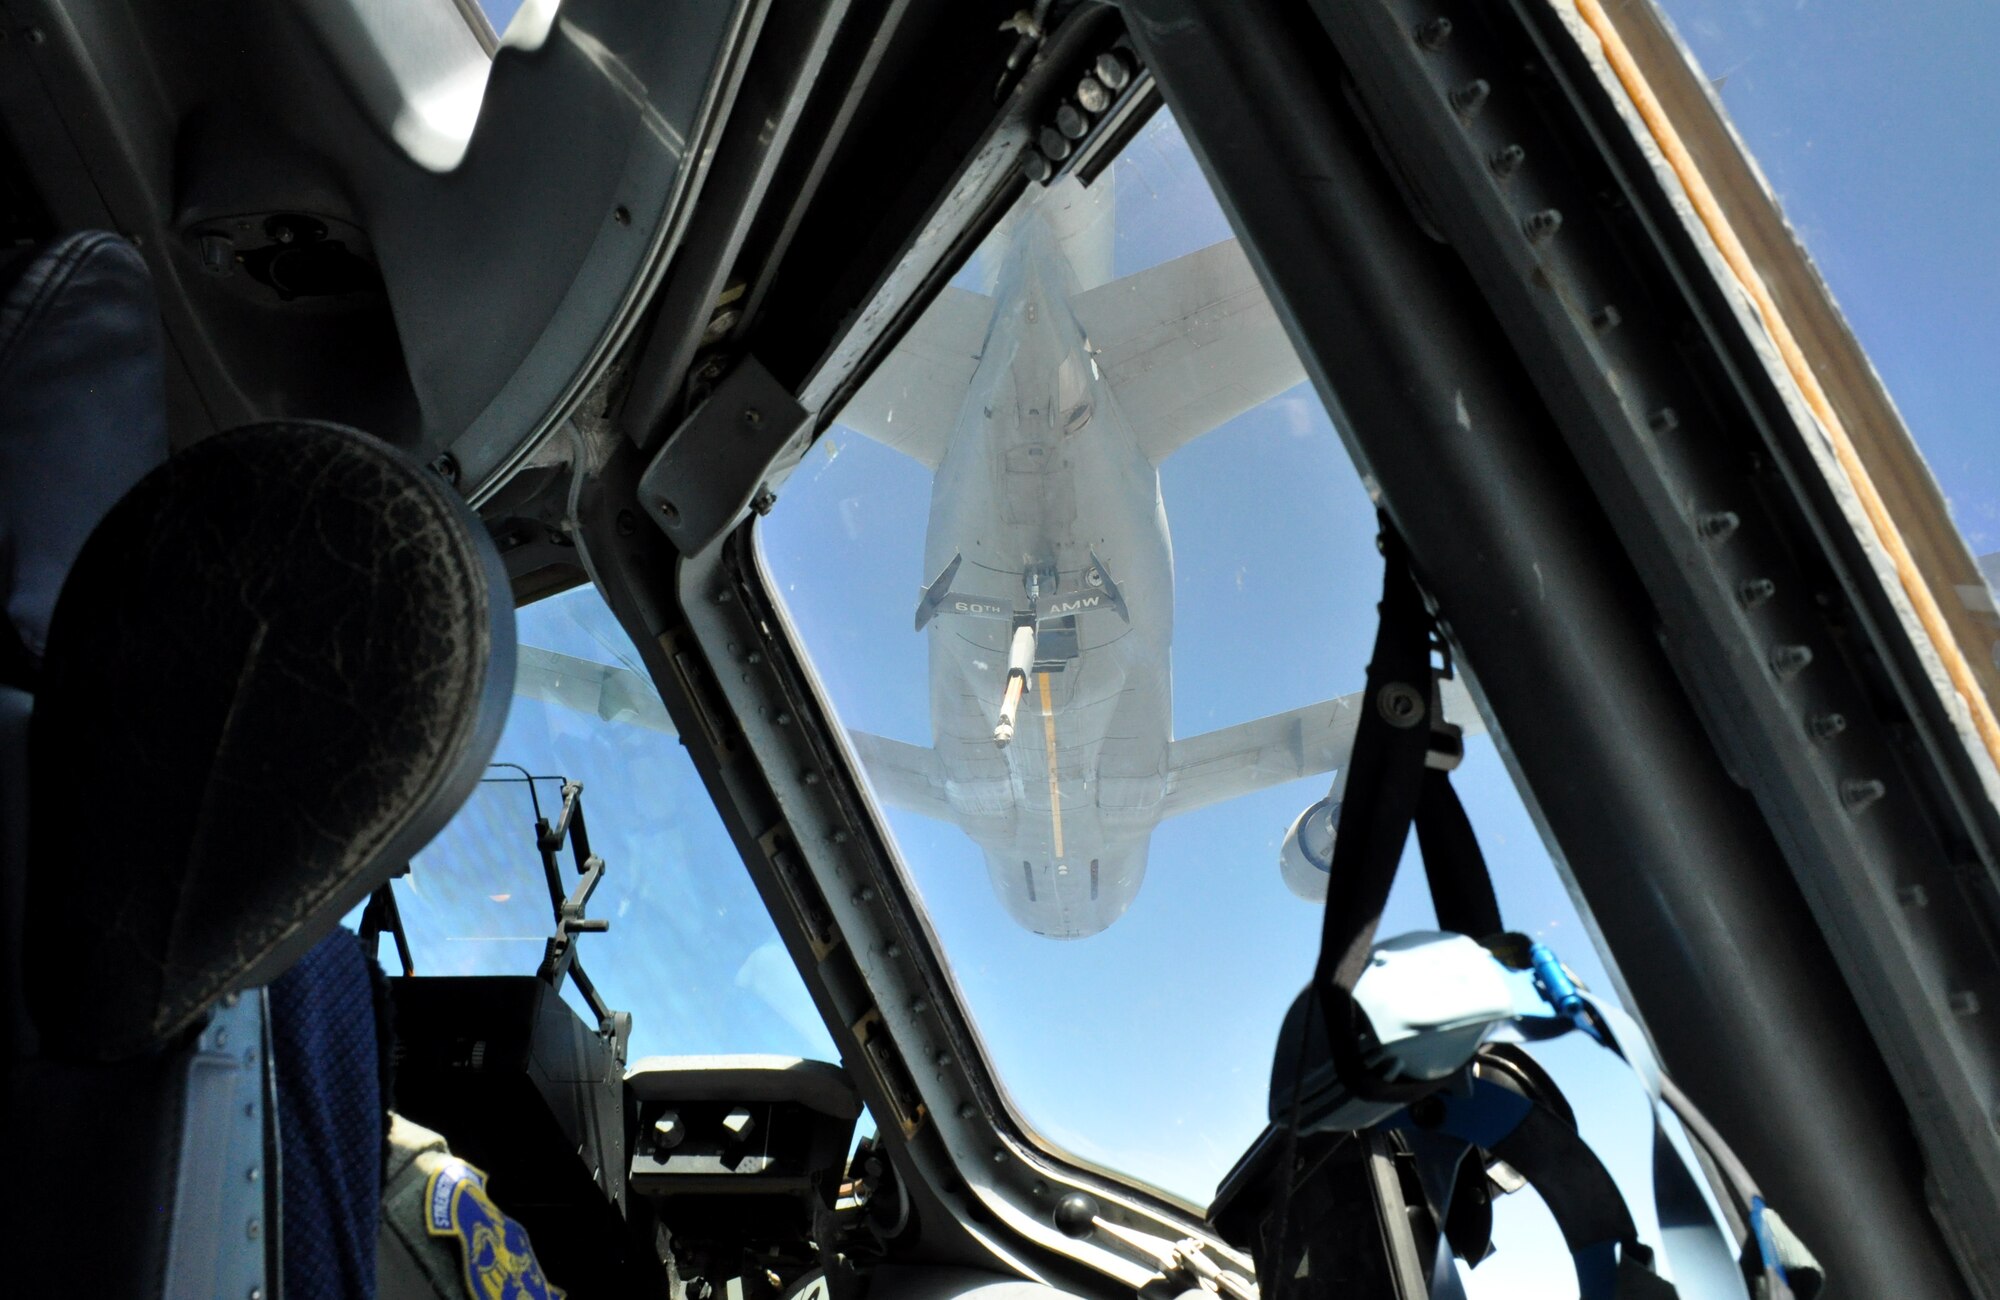 A C-17 Globemaster III approaches a KC-10 Extender during an in-air refueling over northern California on July 22, 2017. The aircraft, both from Travis Air Force Base, Calif., were performing training flights in conjunction with the 349th Air Mobility Wing's Patriot Wyvern exercise. (U.S. Air Force photo by Senior Airman Shelby R. Horn/Released)